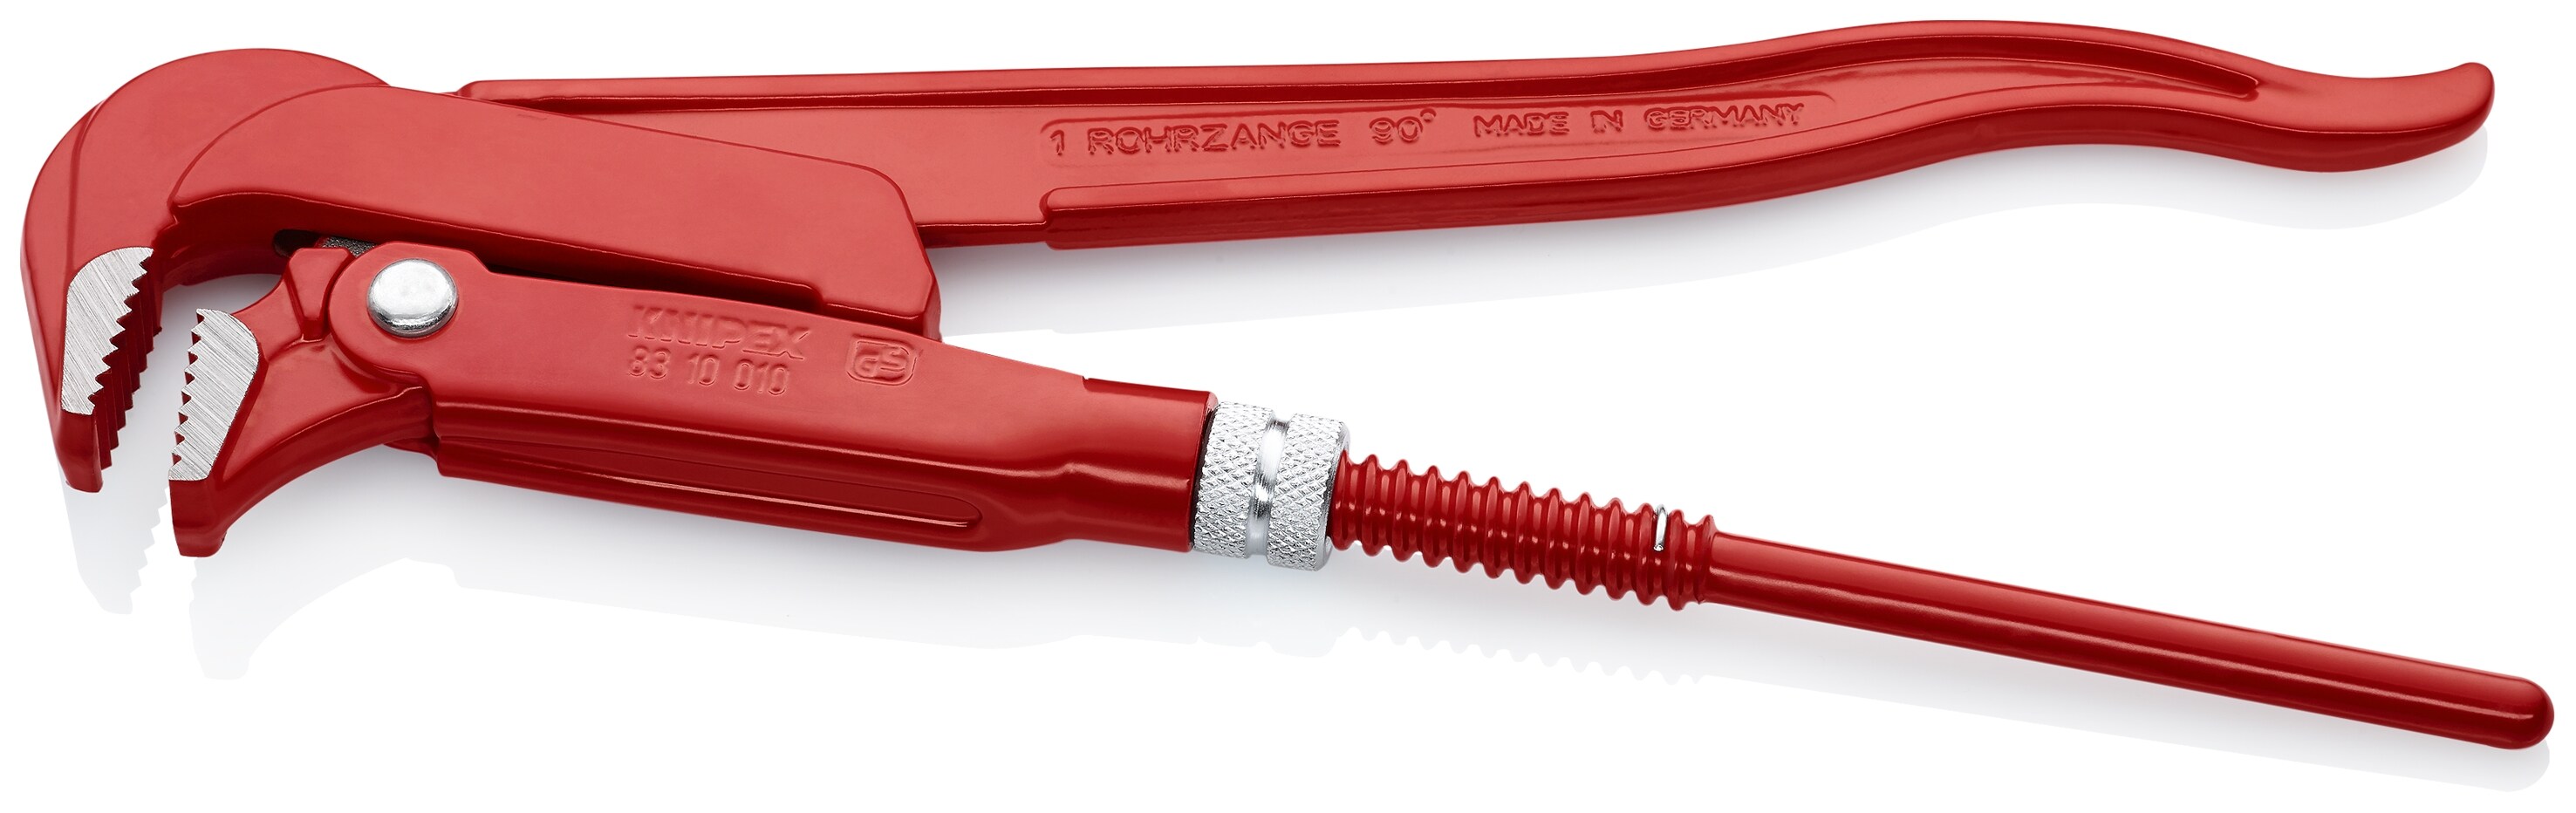 12 Self-Adjusting Steel Pipe Wrench